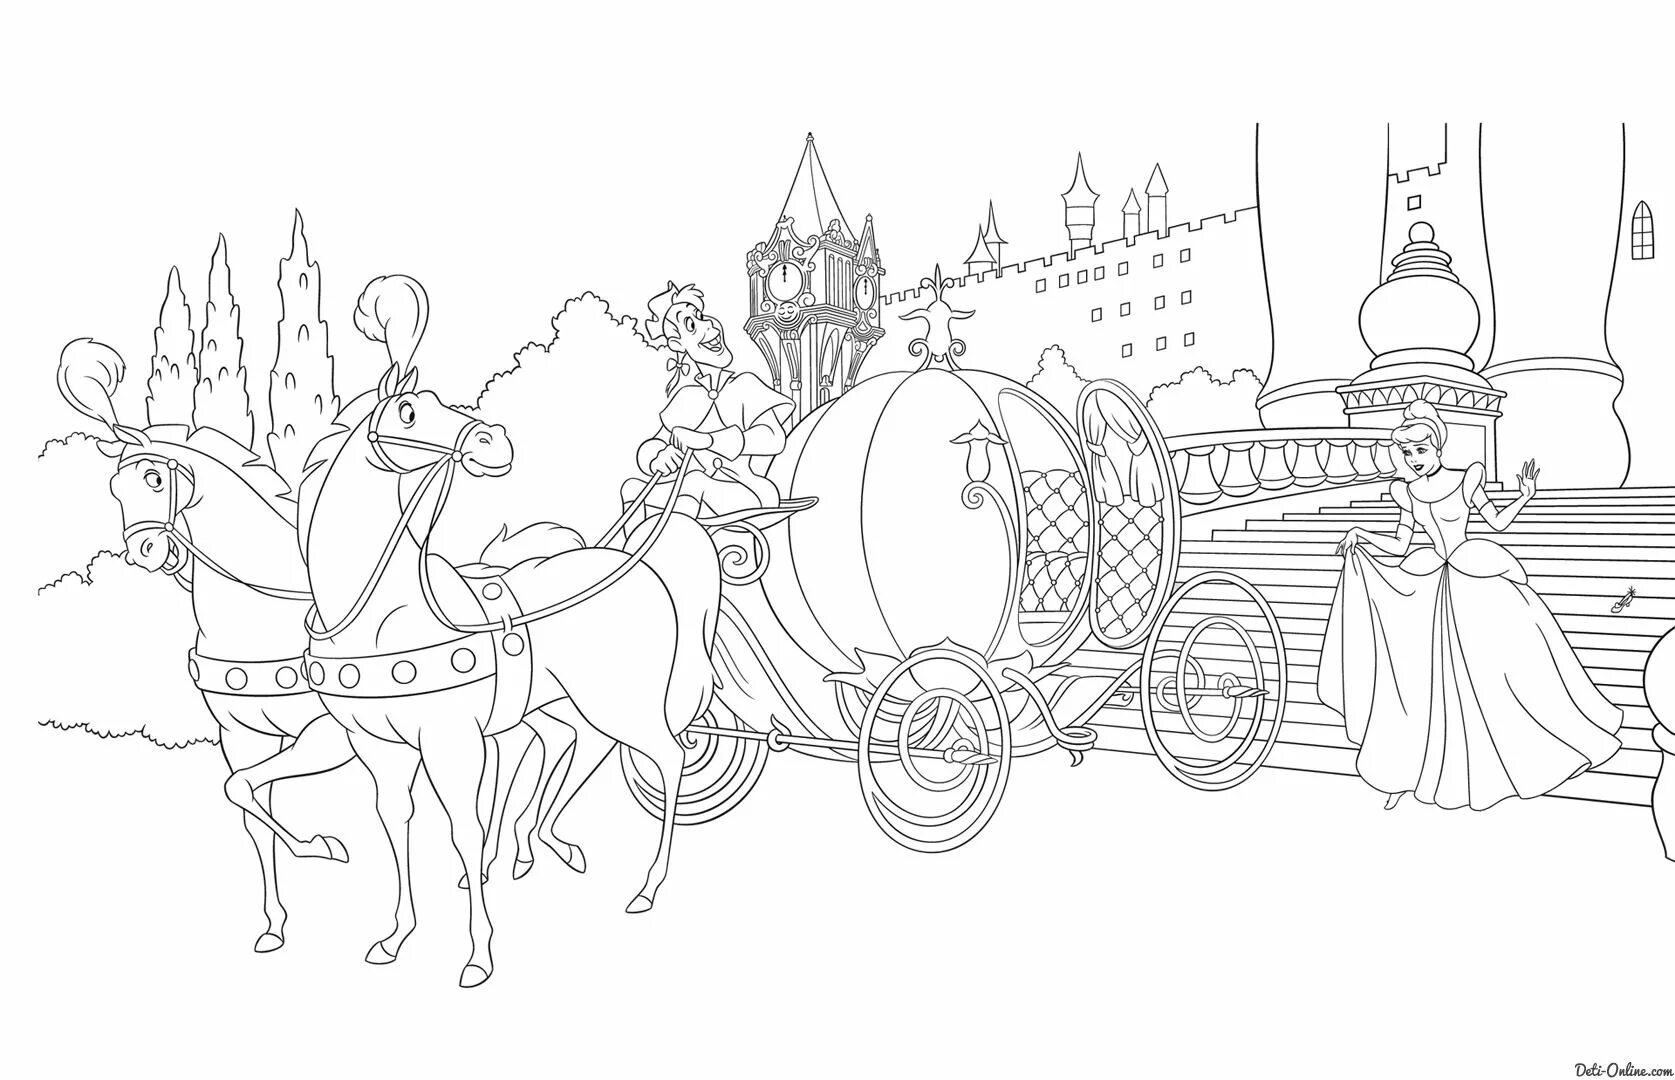 Mystic princess in carriage coloring book